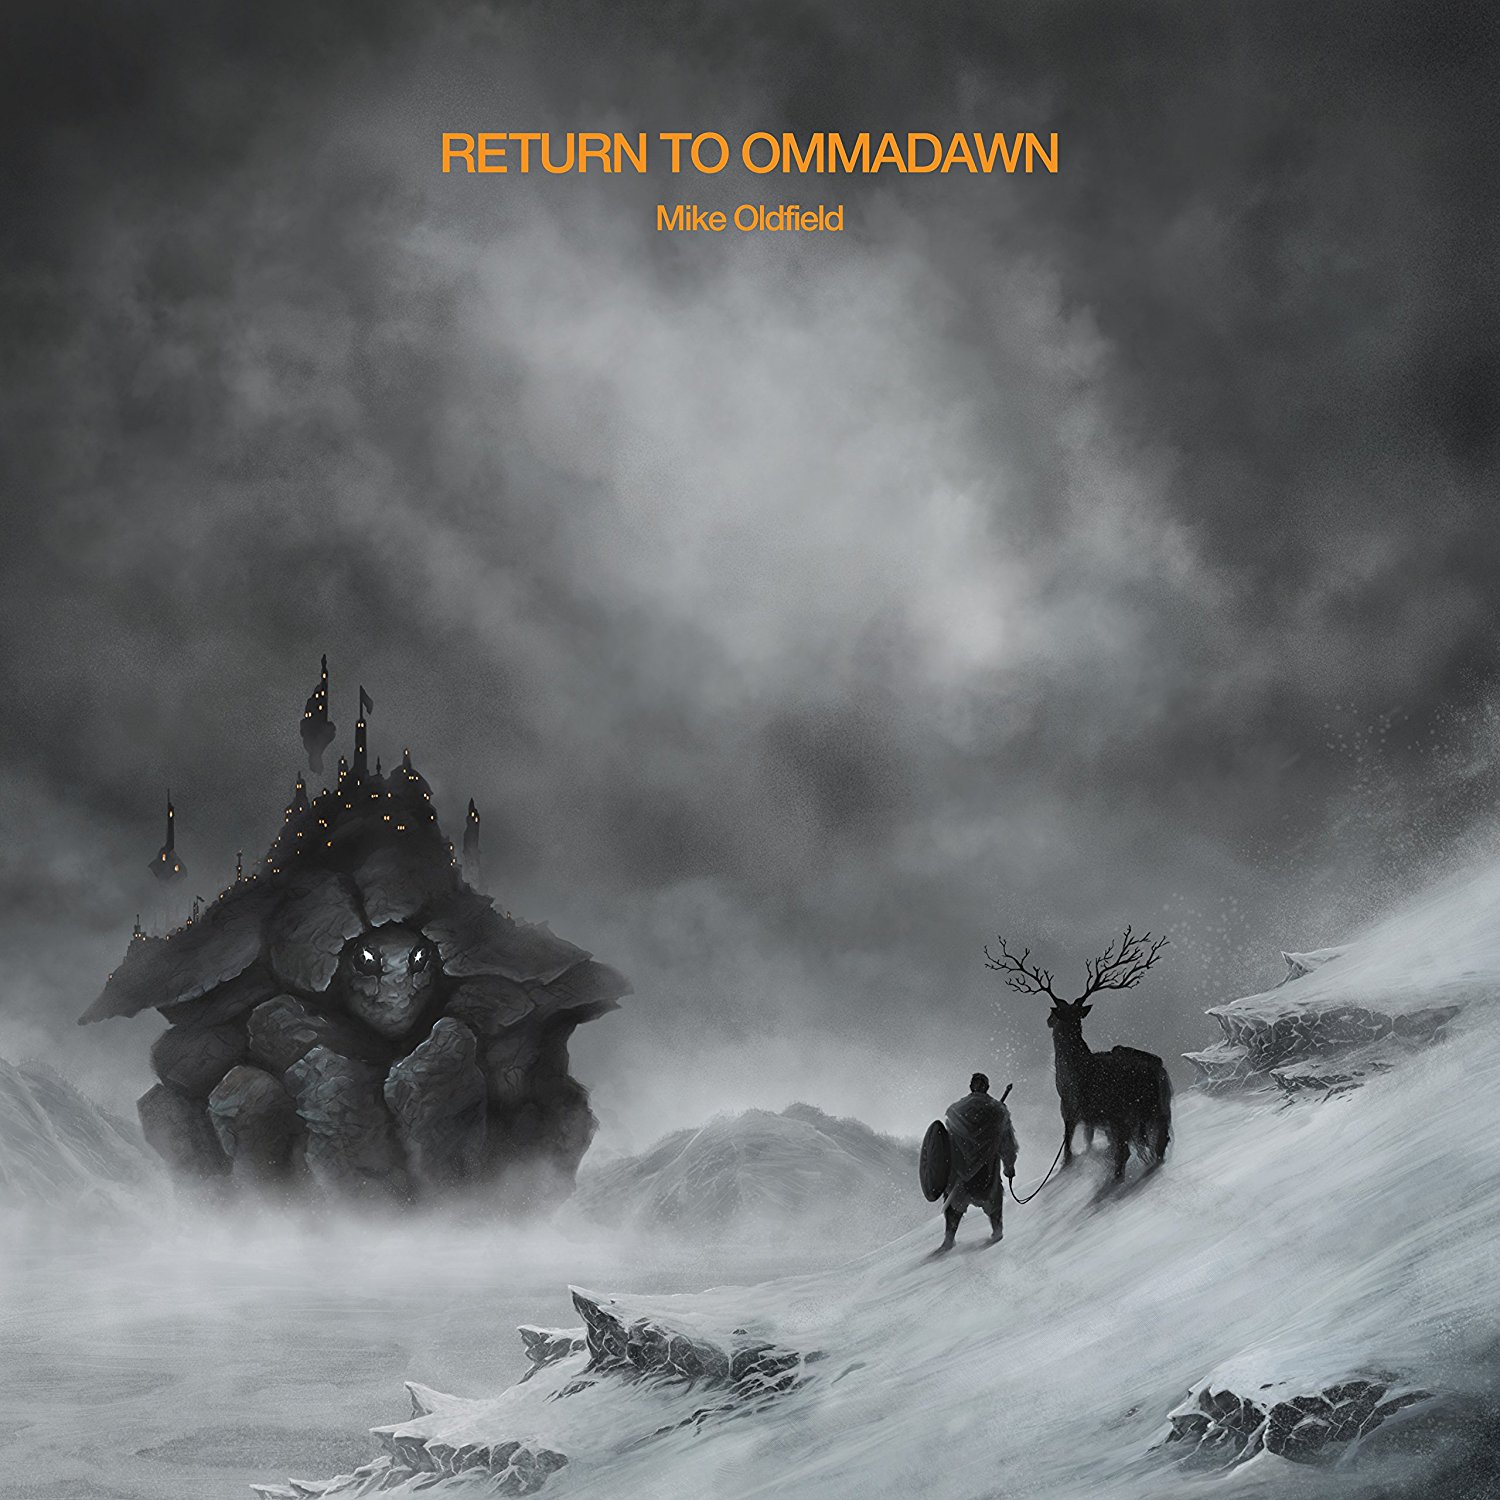 Mike Oldfield: Return to Ommadawn